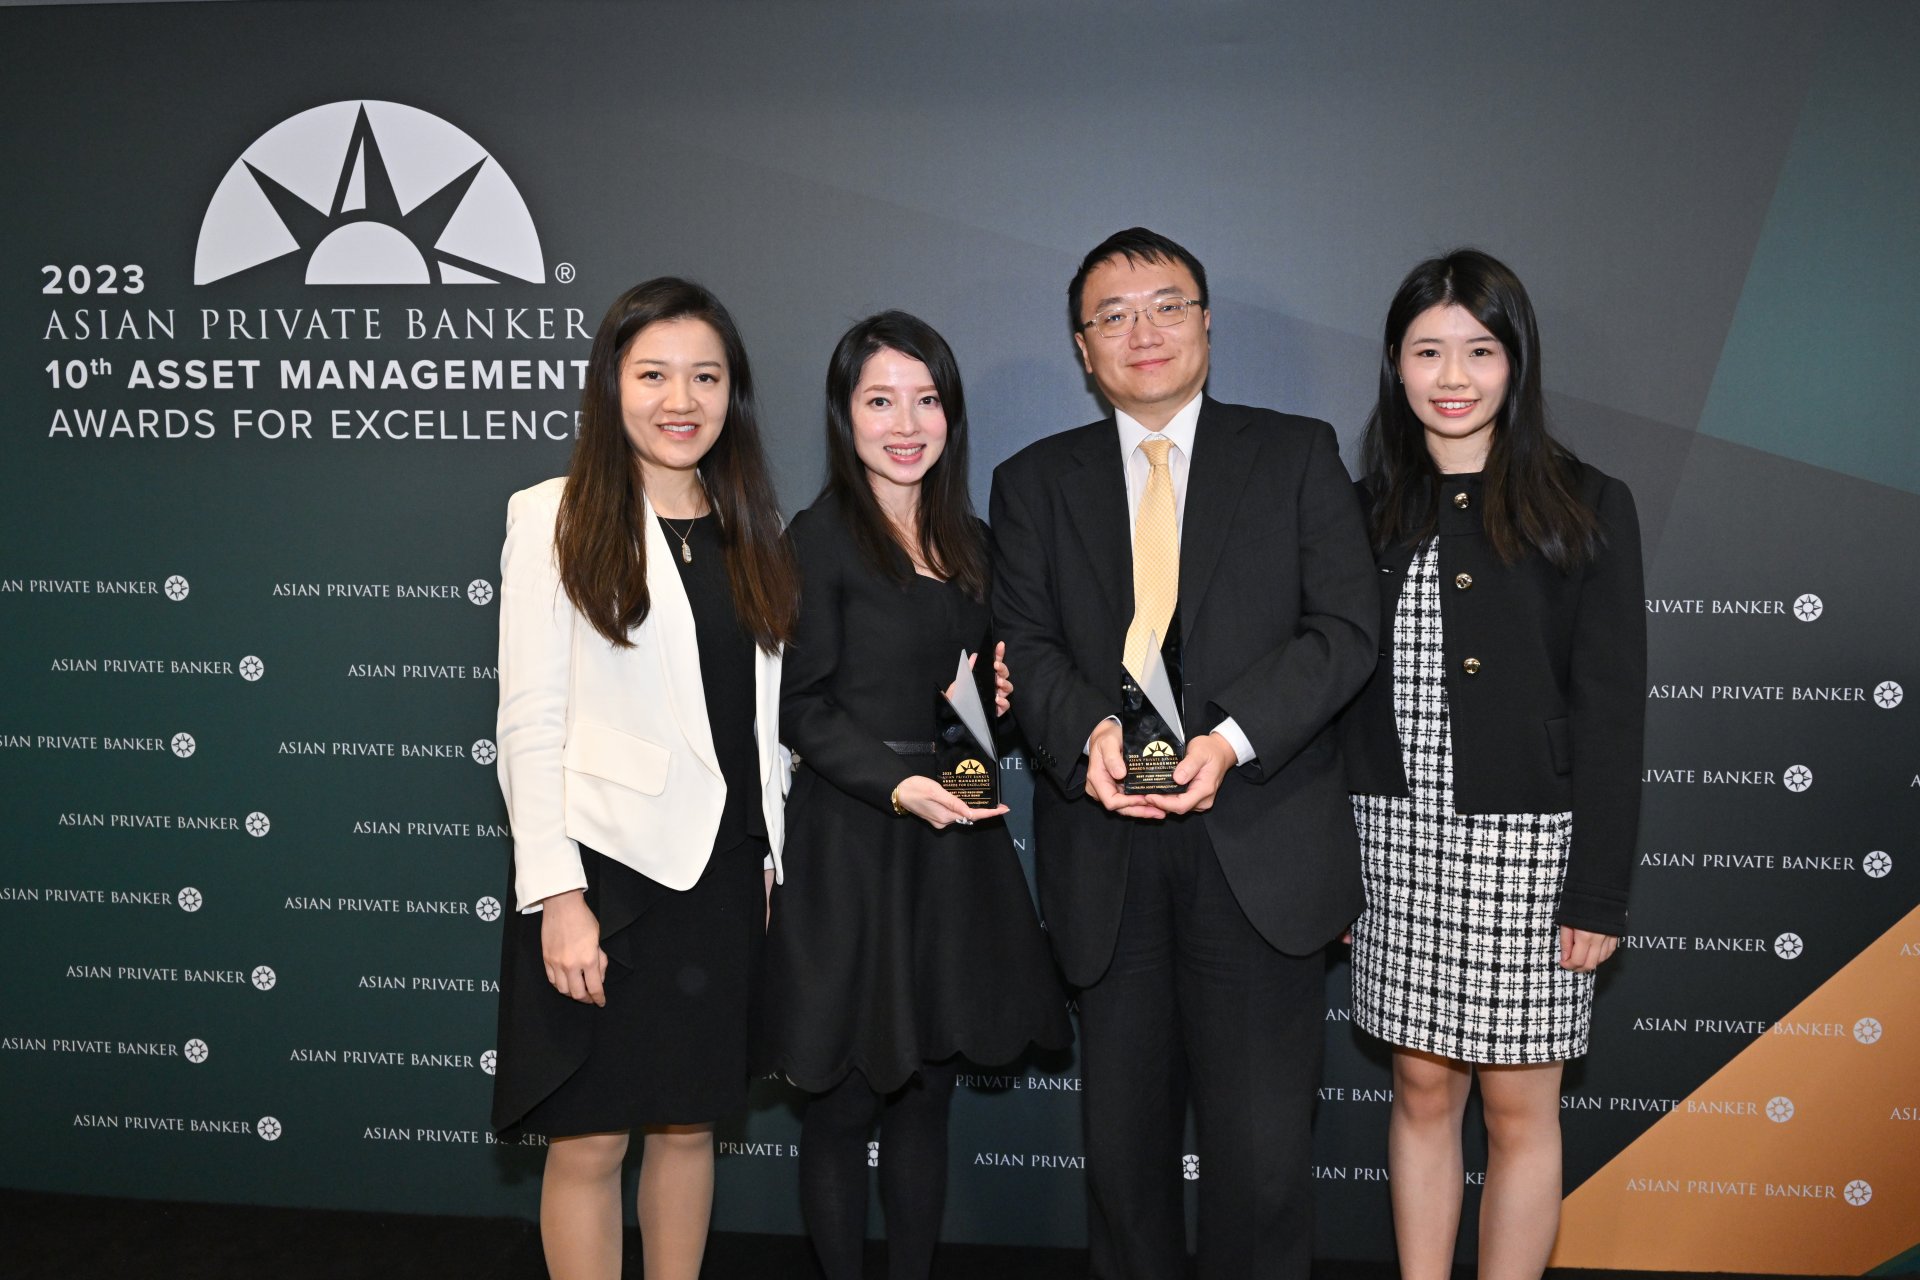 Congratulations to the team at Nomura Asset Management for winning Best Fund Provider - High Yield Bond and Best Fund Provider - Japan Equity